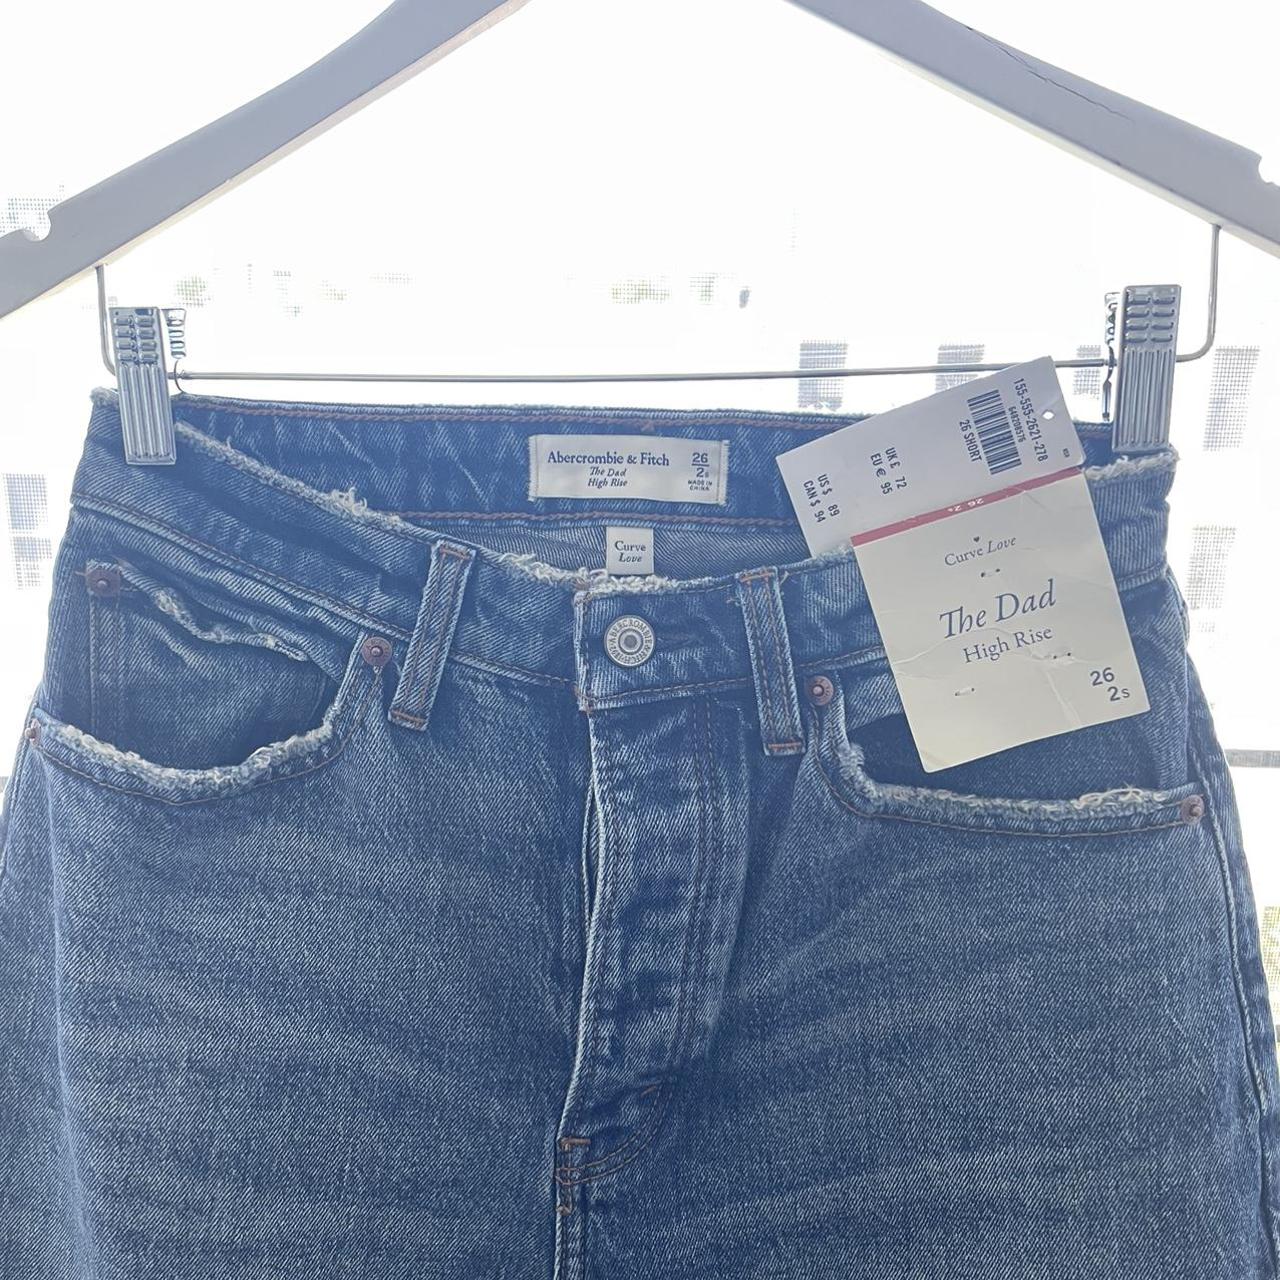 Abercrombie Curve Love The Dad high rise jeans... - Depop